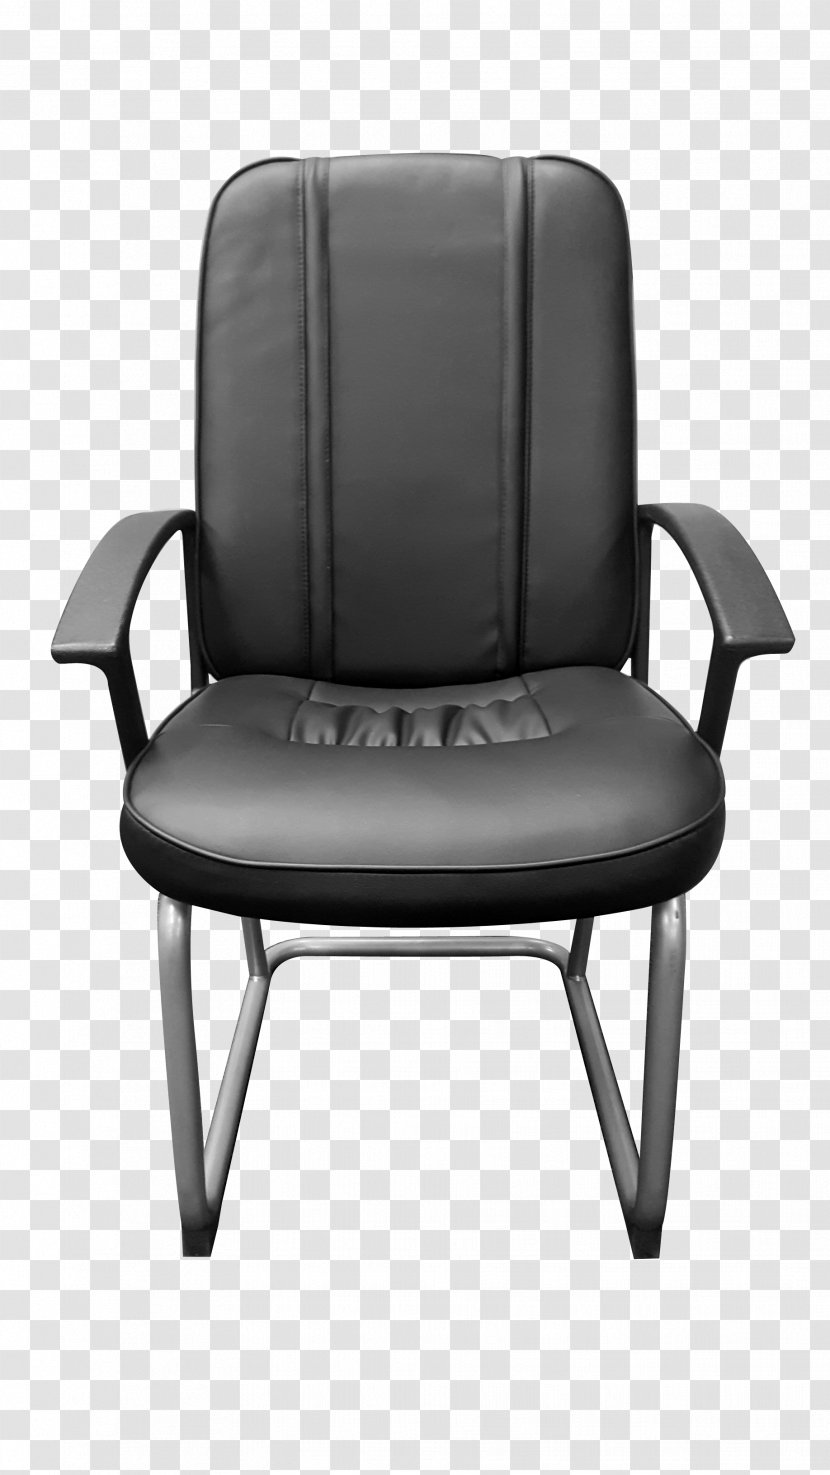 Furniture Wing Chair Armrest Office & Desk Chairs - Shop Transparent PNG